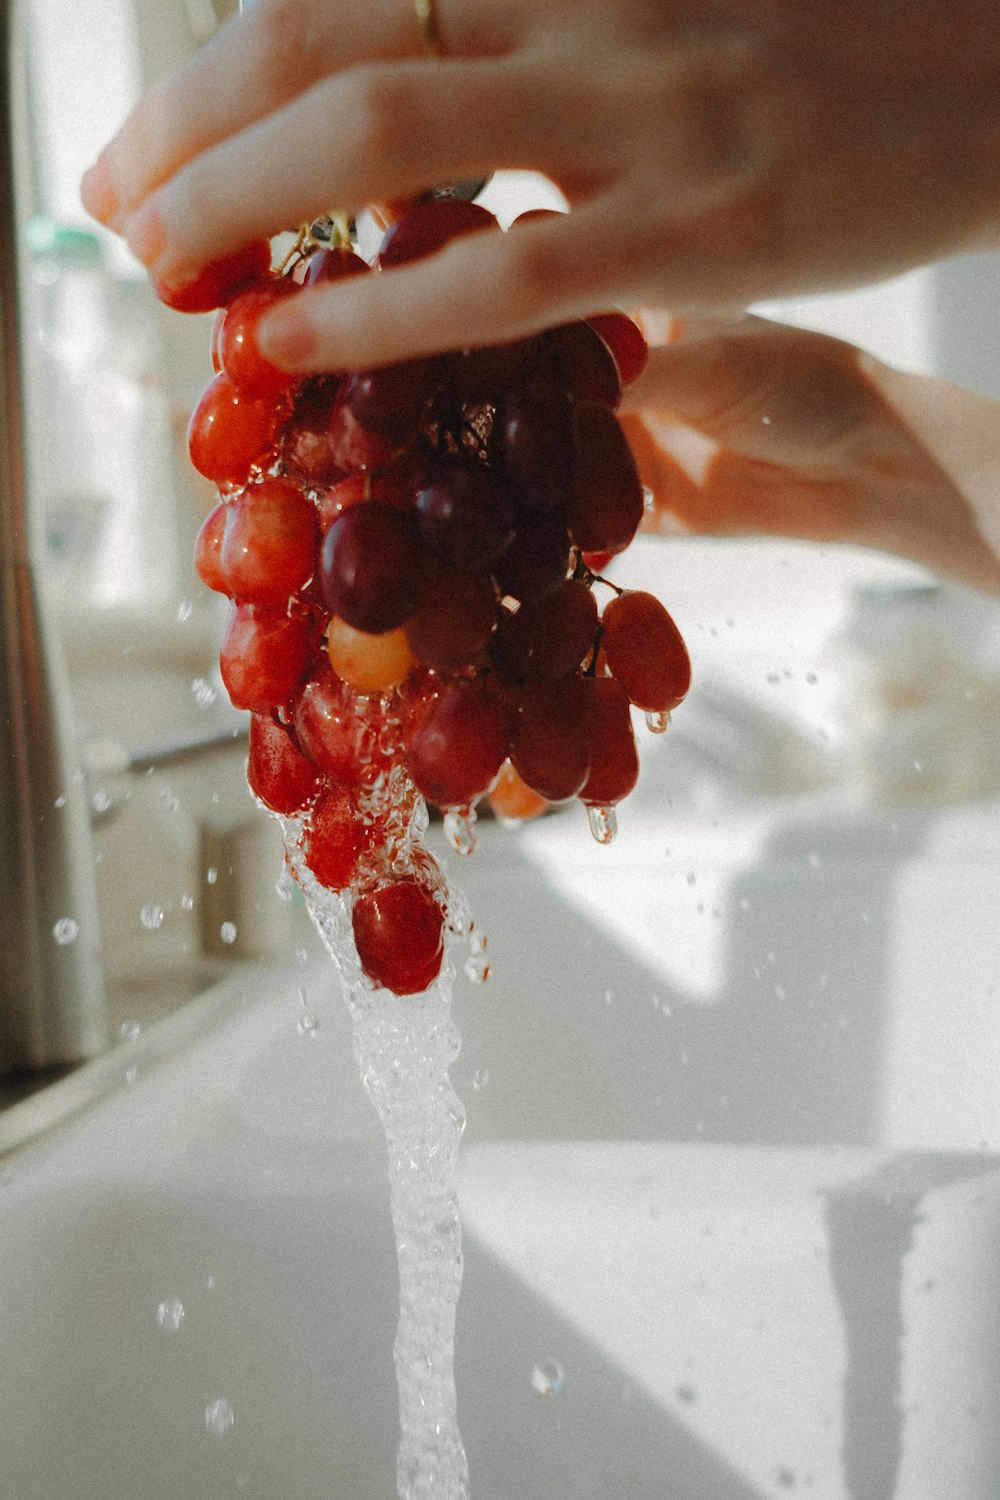 a person is washing grapes in a sink